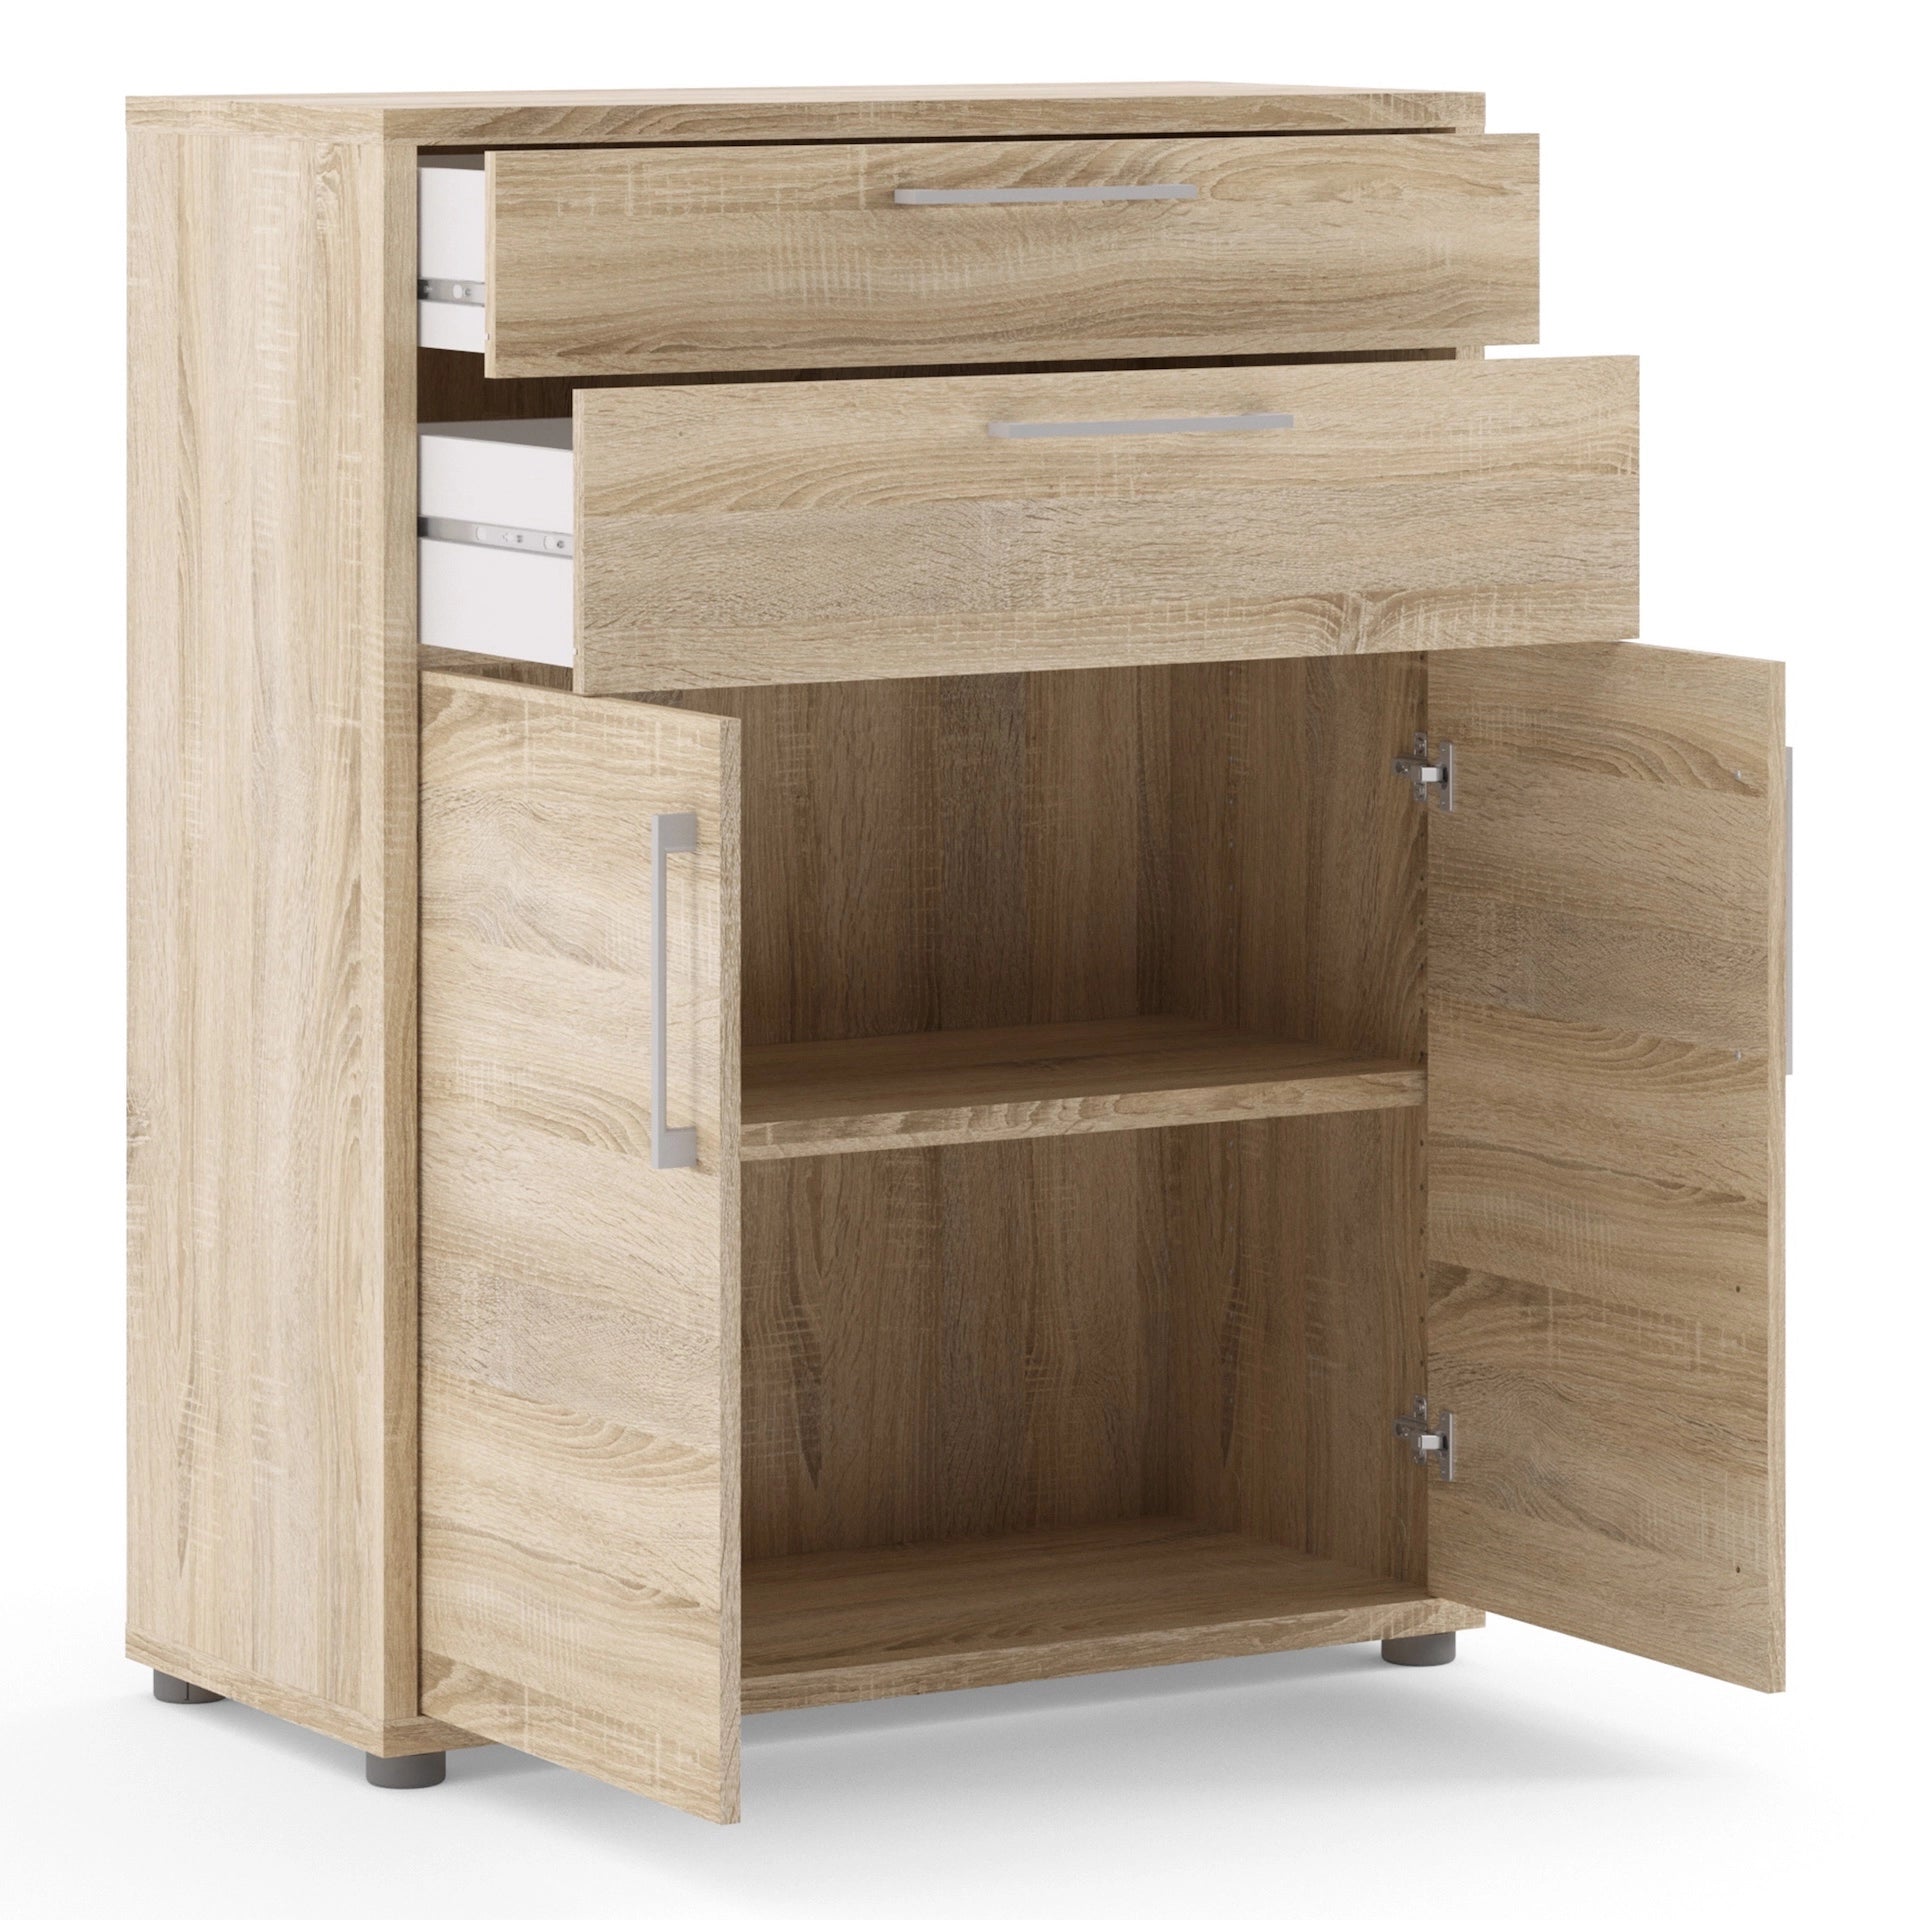 Furniture To Go Prima Bookcase 1 Shelf with 2 Drawers & 2 Doors in Oak